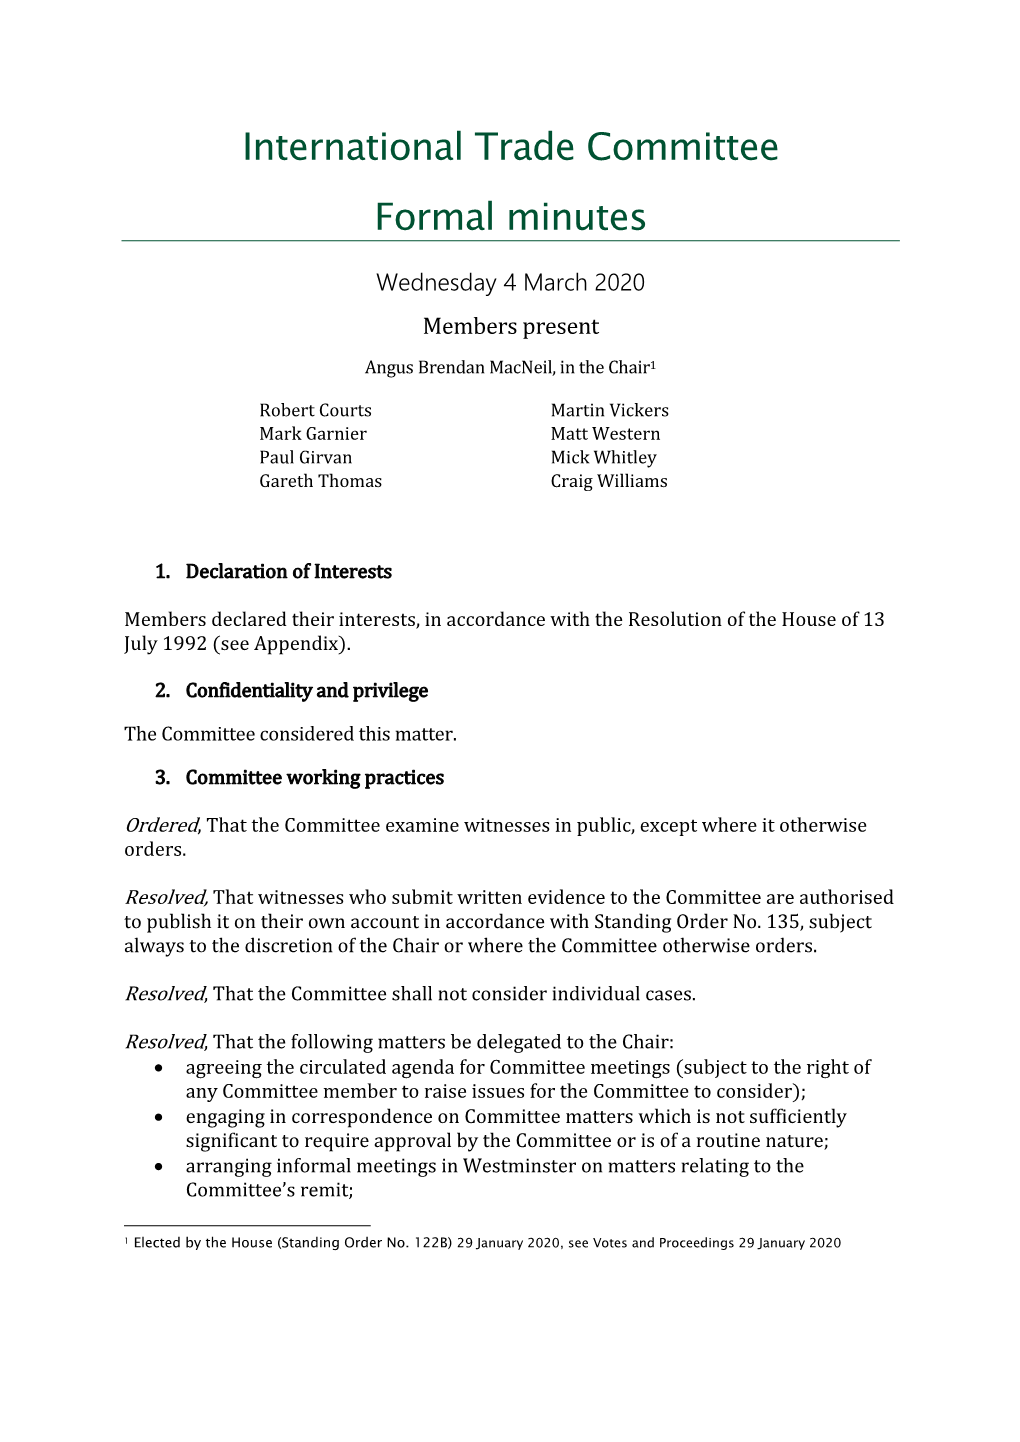 International Trade Committee Formal Minutes